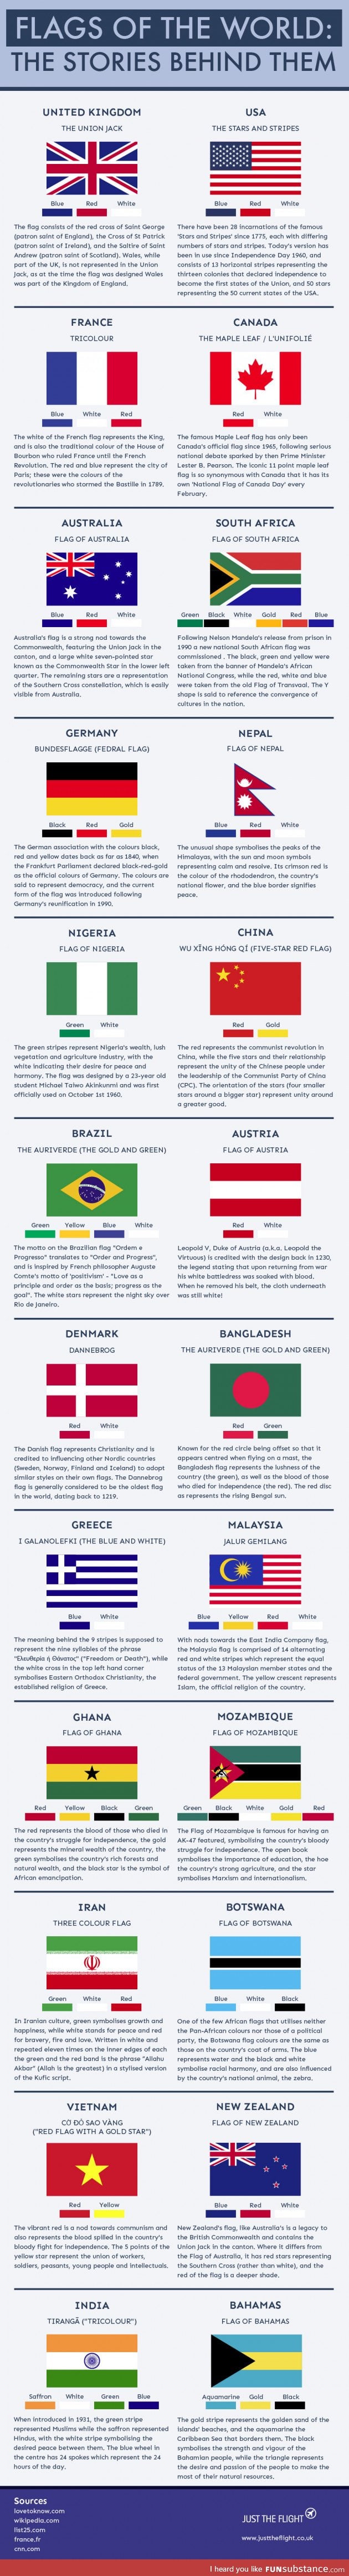 The flags of the world and the stories behind them